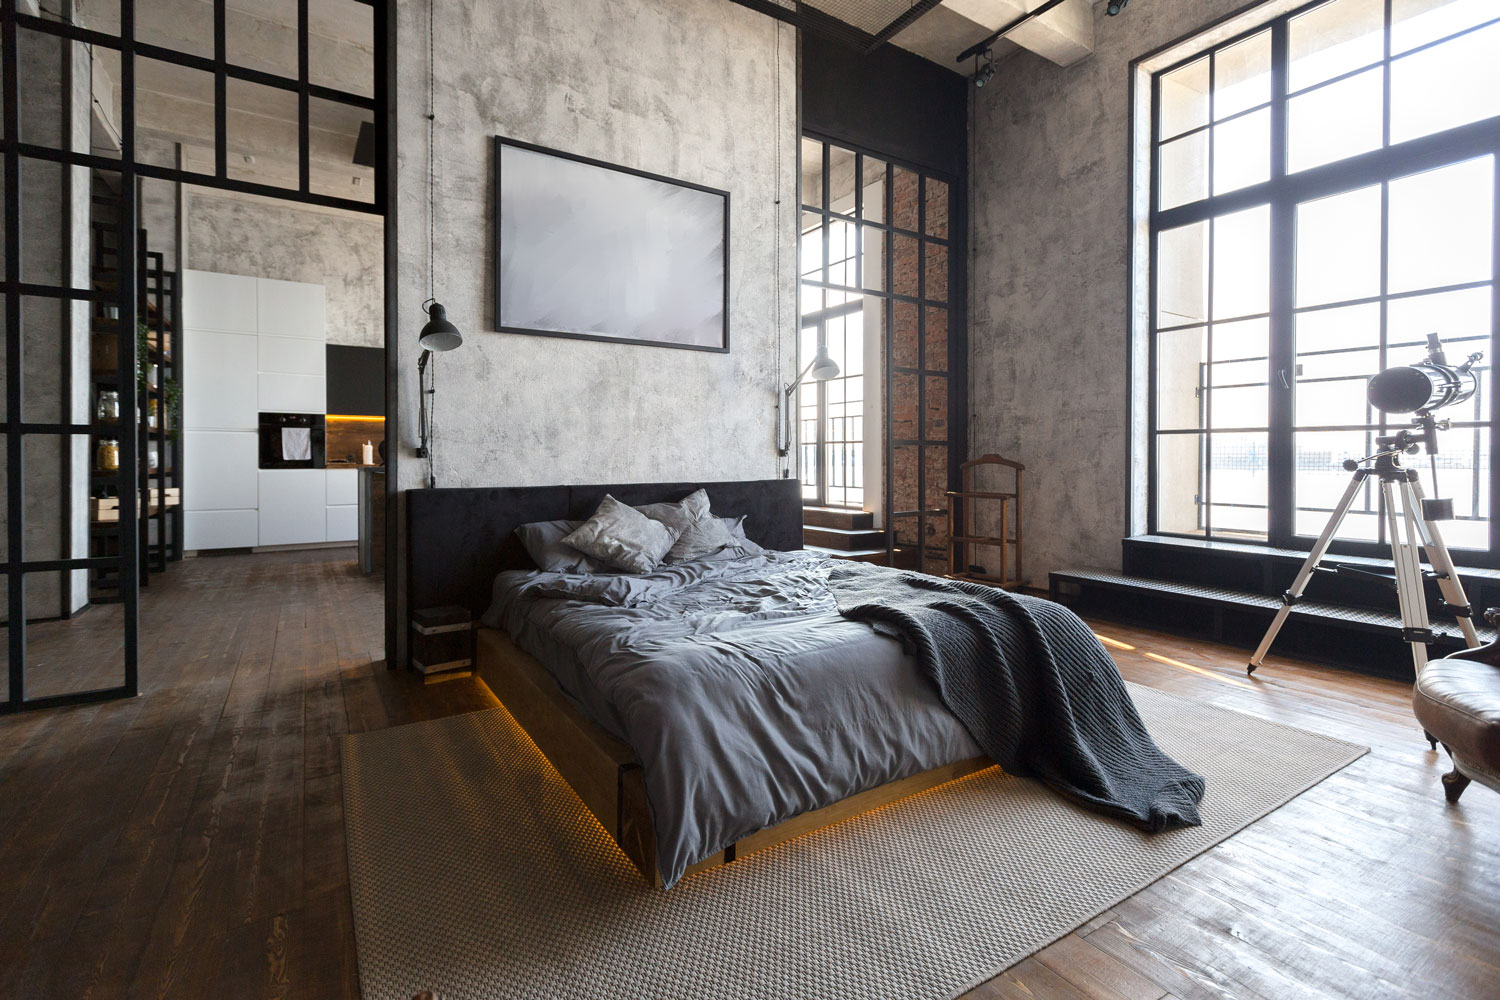 A huge open space bedroom with gray beddings on the bed with orange backlight